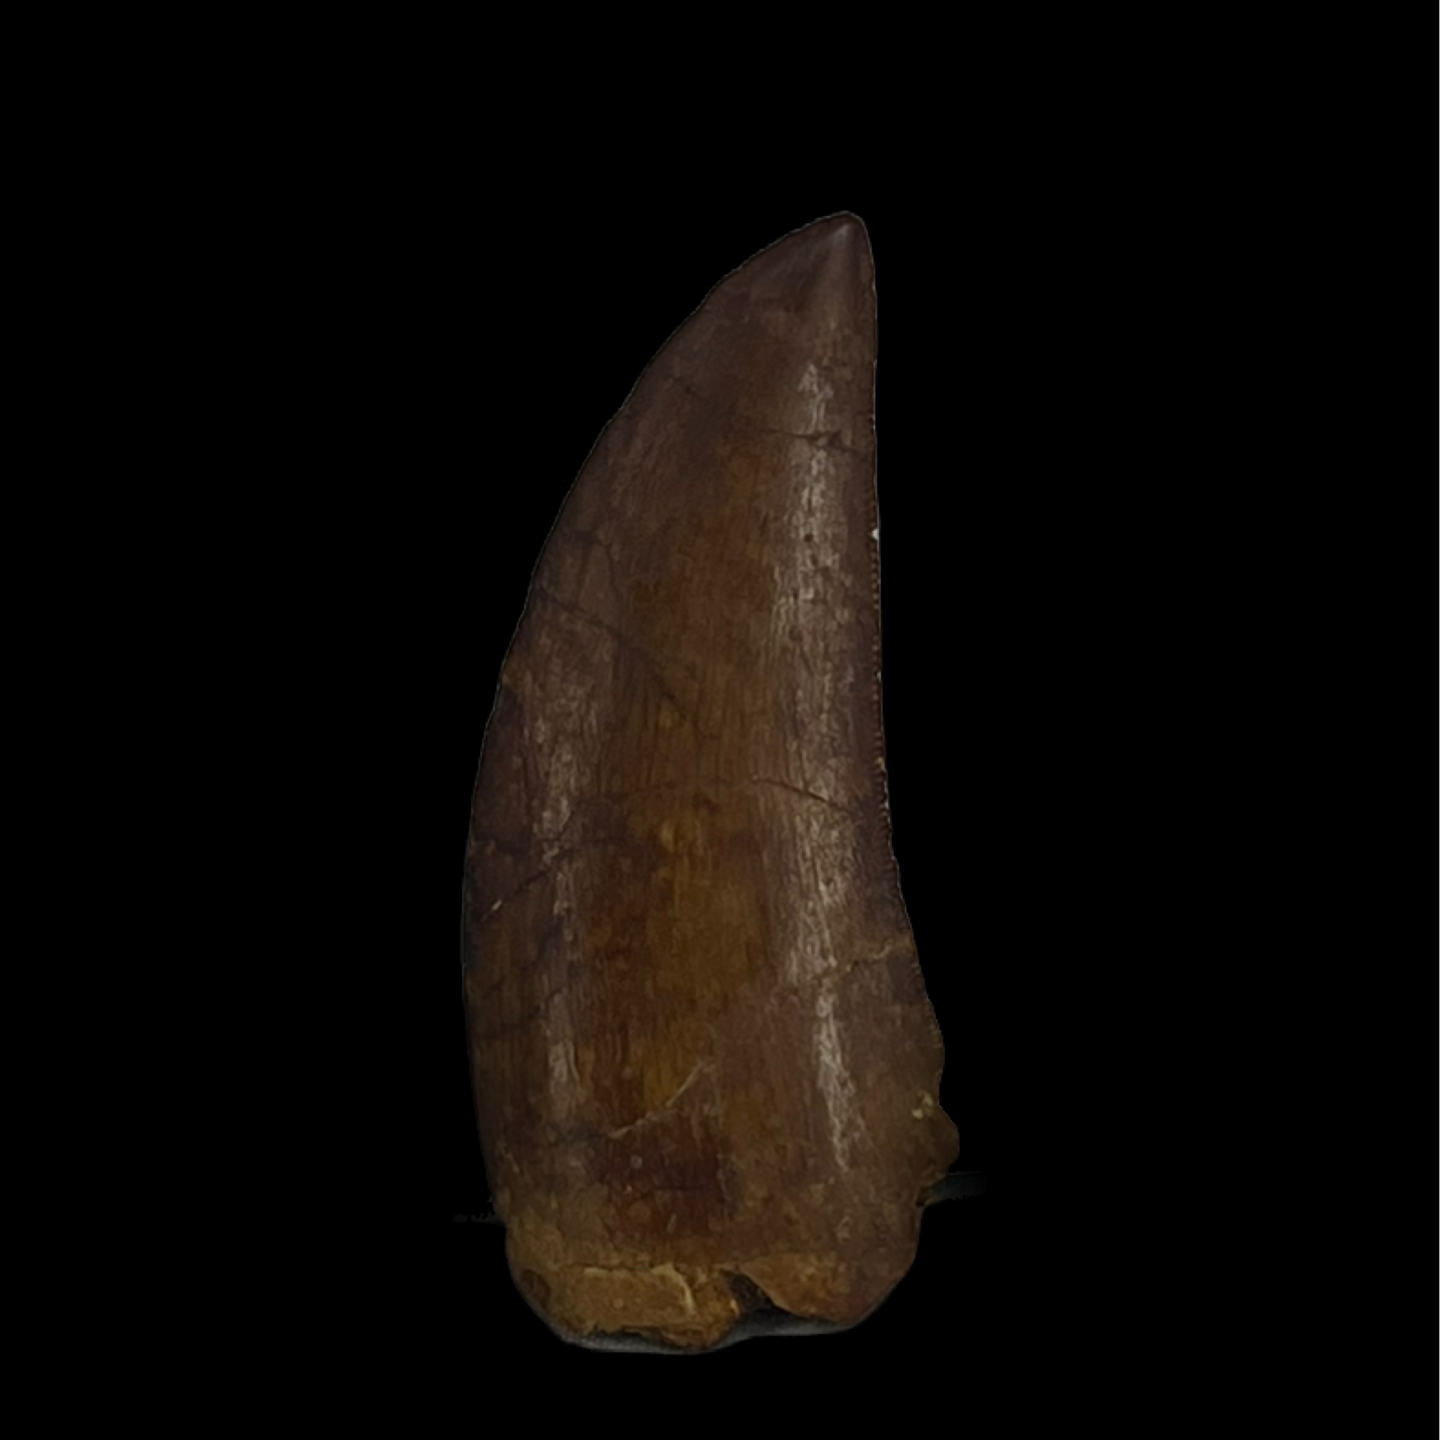 Carcharodontosaurus Tooth 04 (1.9 in)